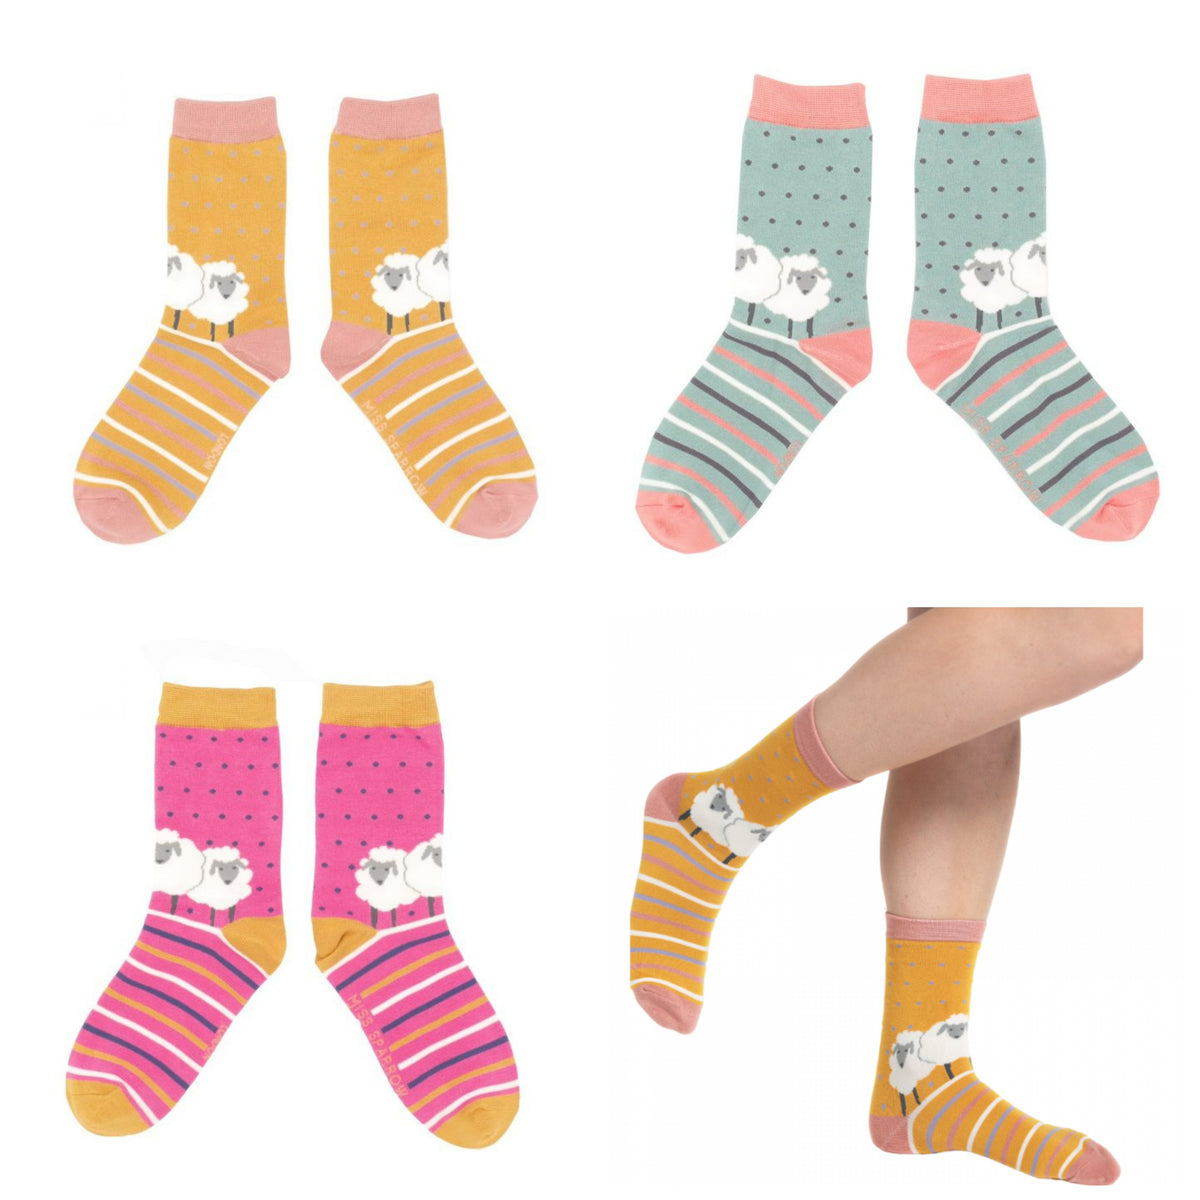 Miss Sparrow Bamboo Socks for Women - Sheep Friends Composite